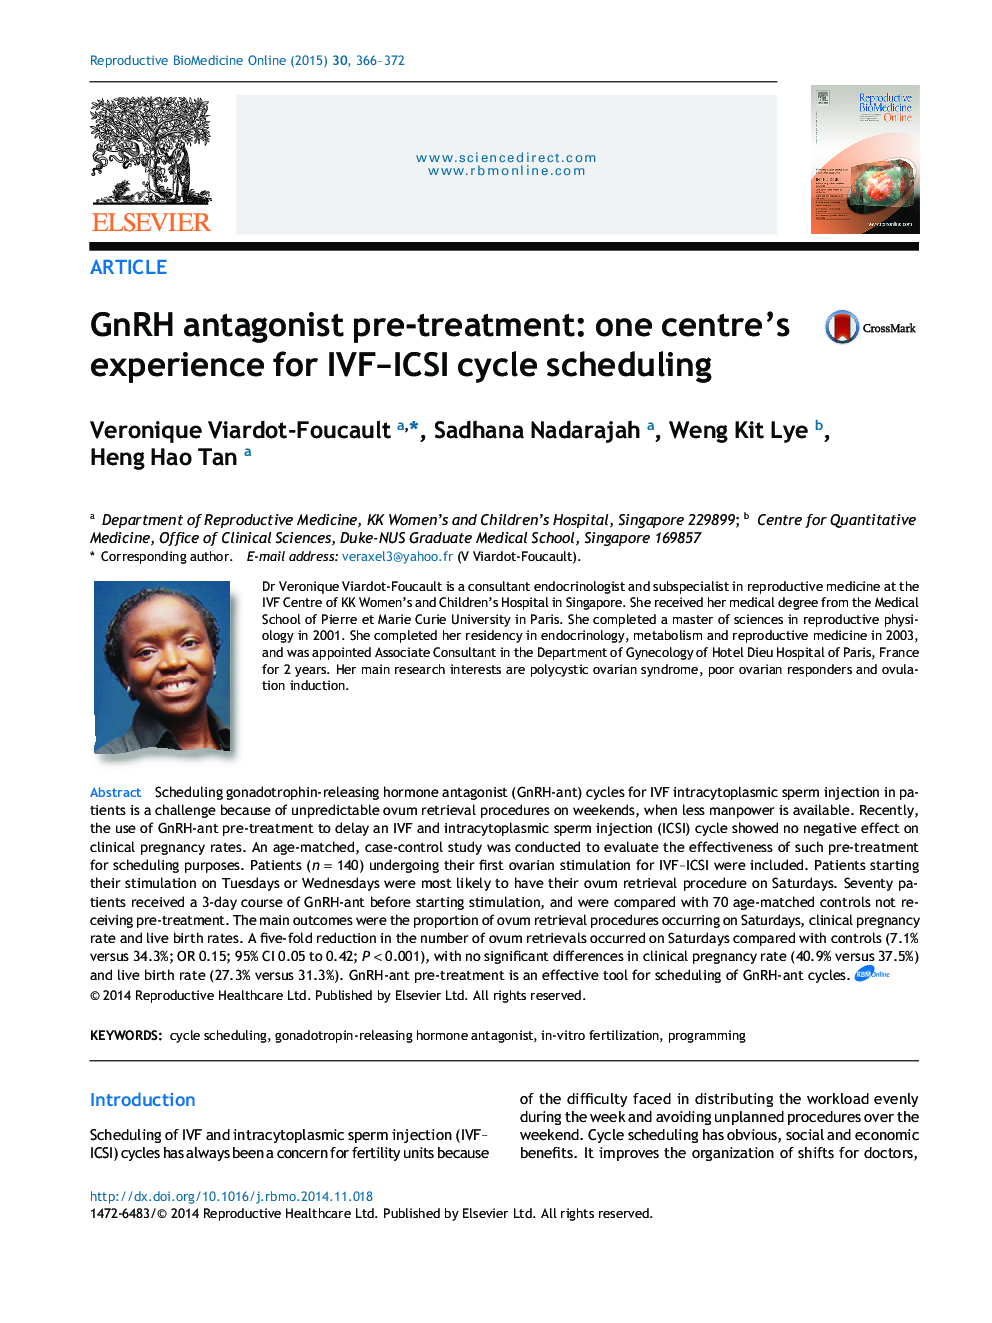 GnRH antagonist pre-treatment: one centre's experience for IVF–ICSI cycle scheduling